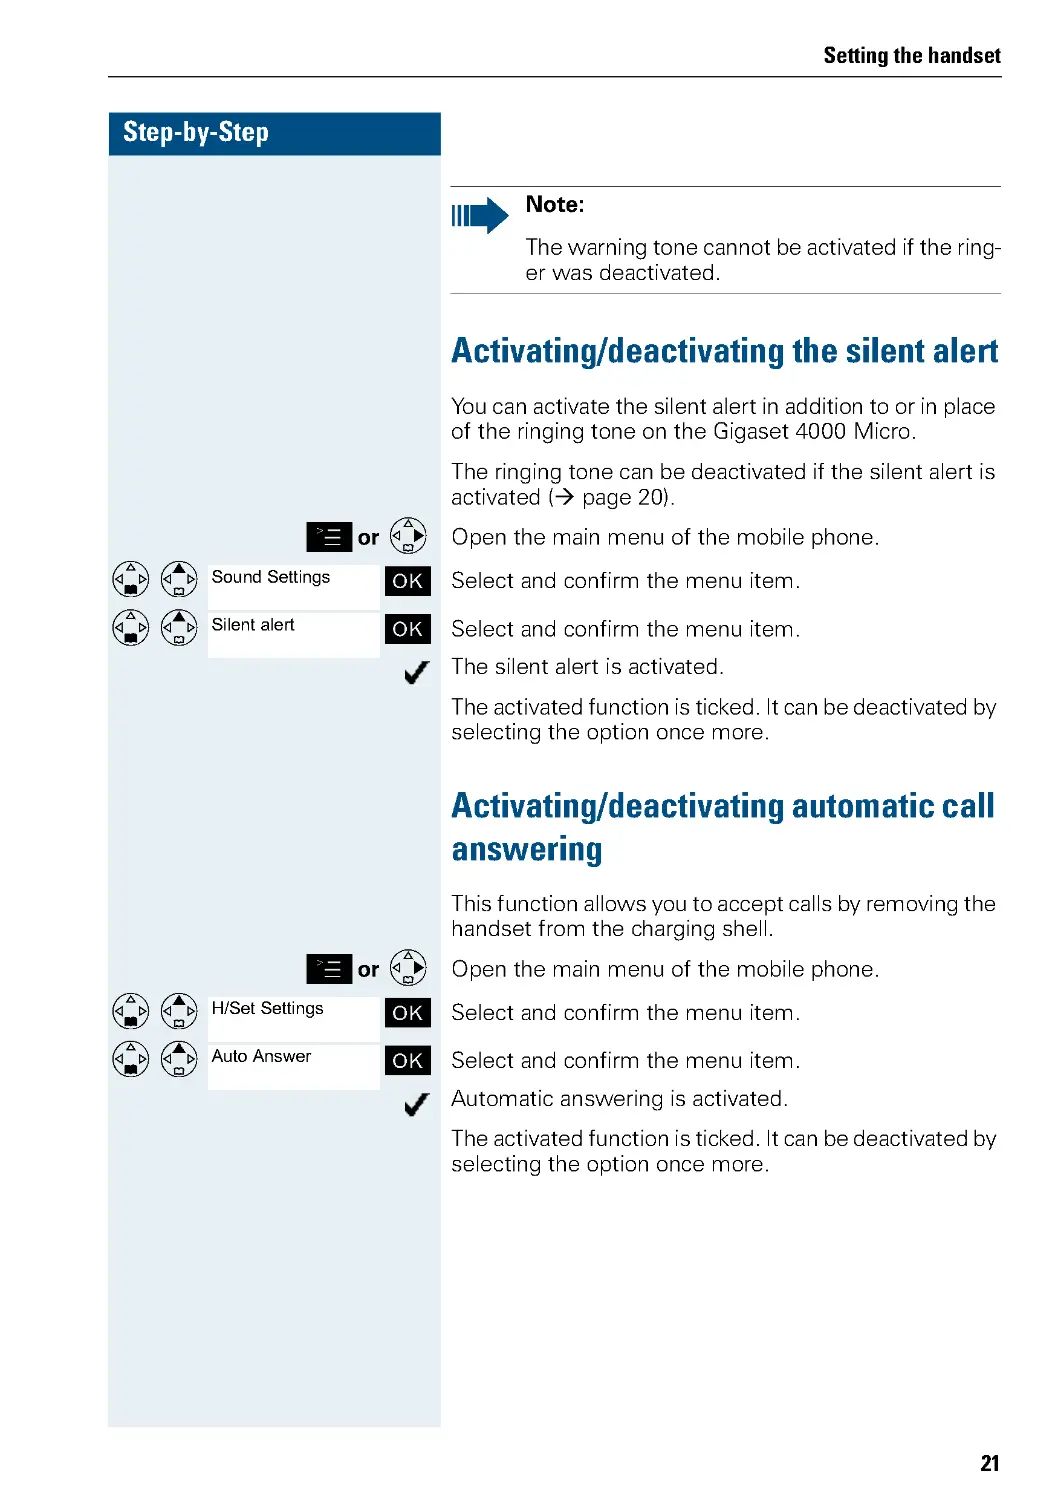 Activating/deactivating the silent alert
Activating/deactivating automatic call answering